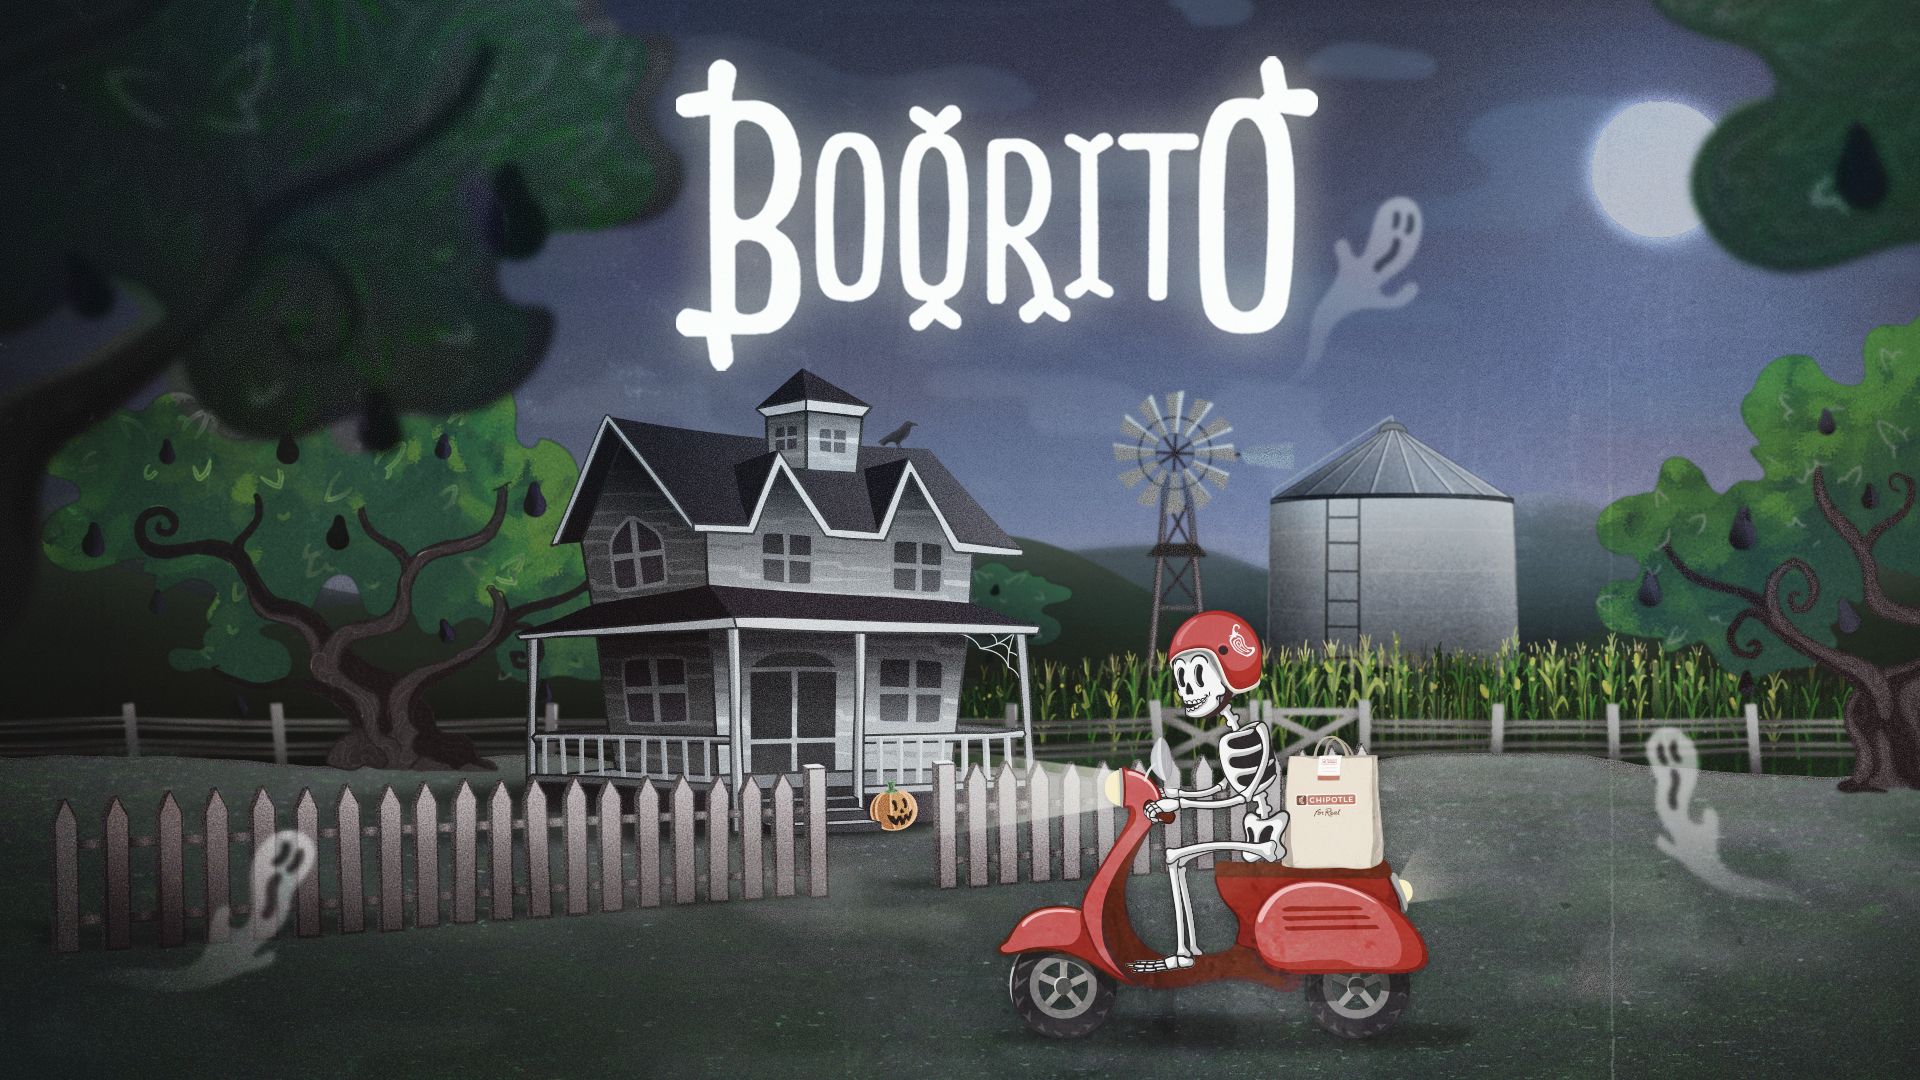 Chipotle Brings Back Boorito In Canada Foodology